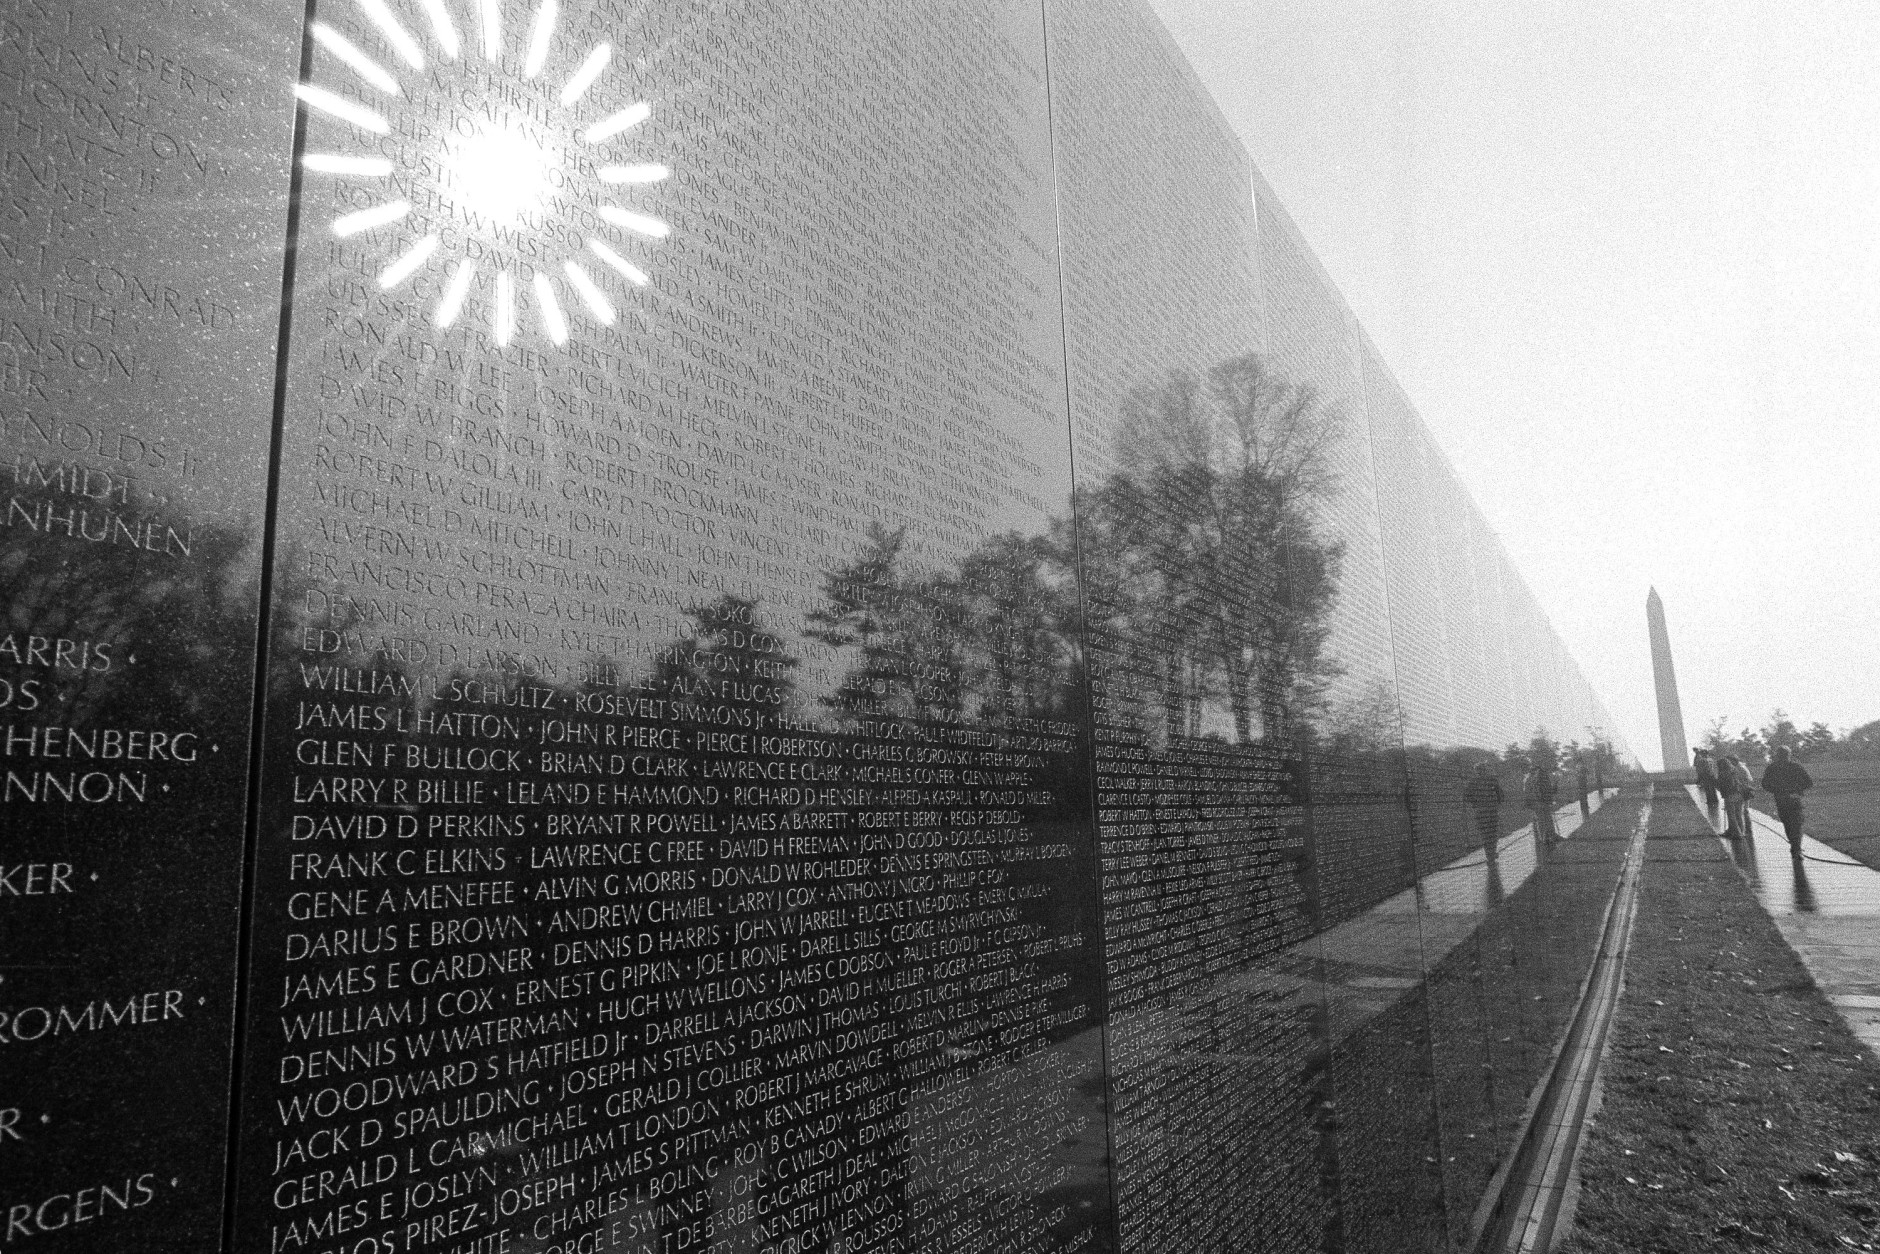 The morning sun reflects from the black marble walls of the Vietnam Veterans Memorial in Washington on Nov. 9, 1982. The memorial contains the names of more than 50,000 Americans killed or missing in the Vietnam conflict. (AP Photo/Bob Daugherty)